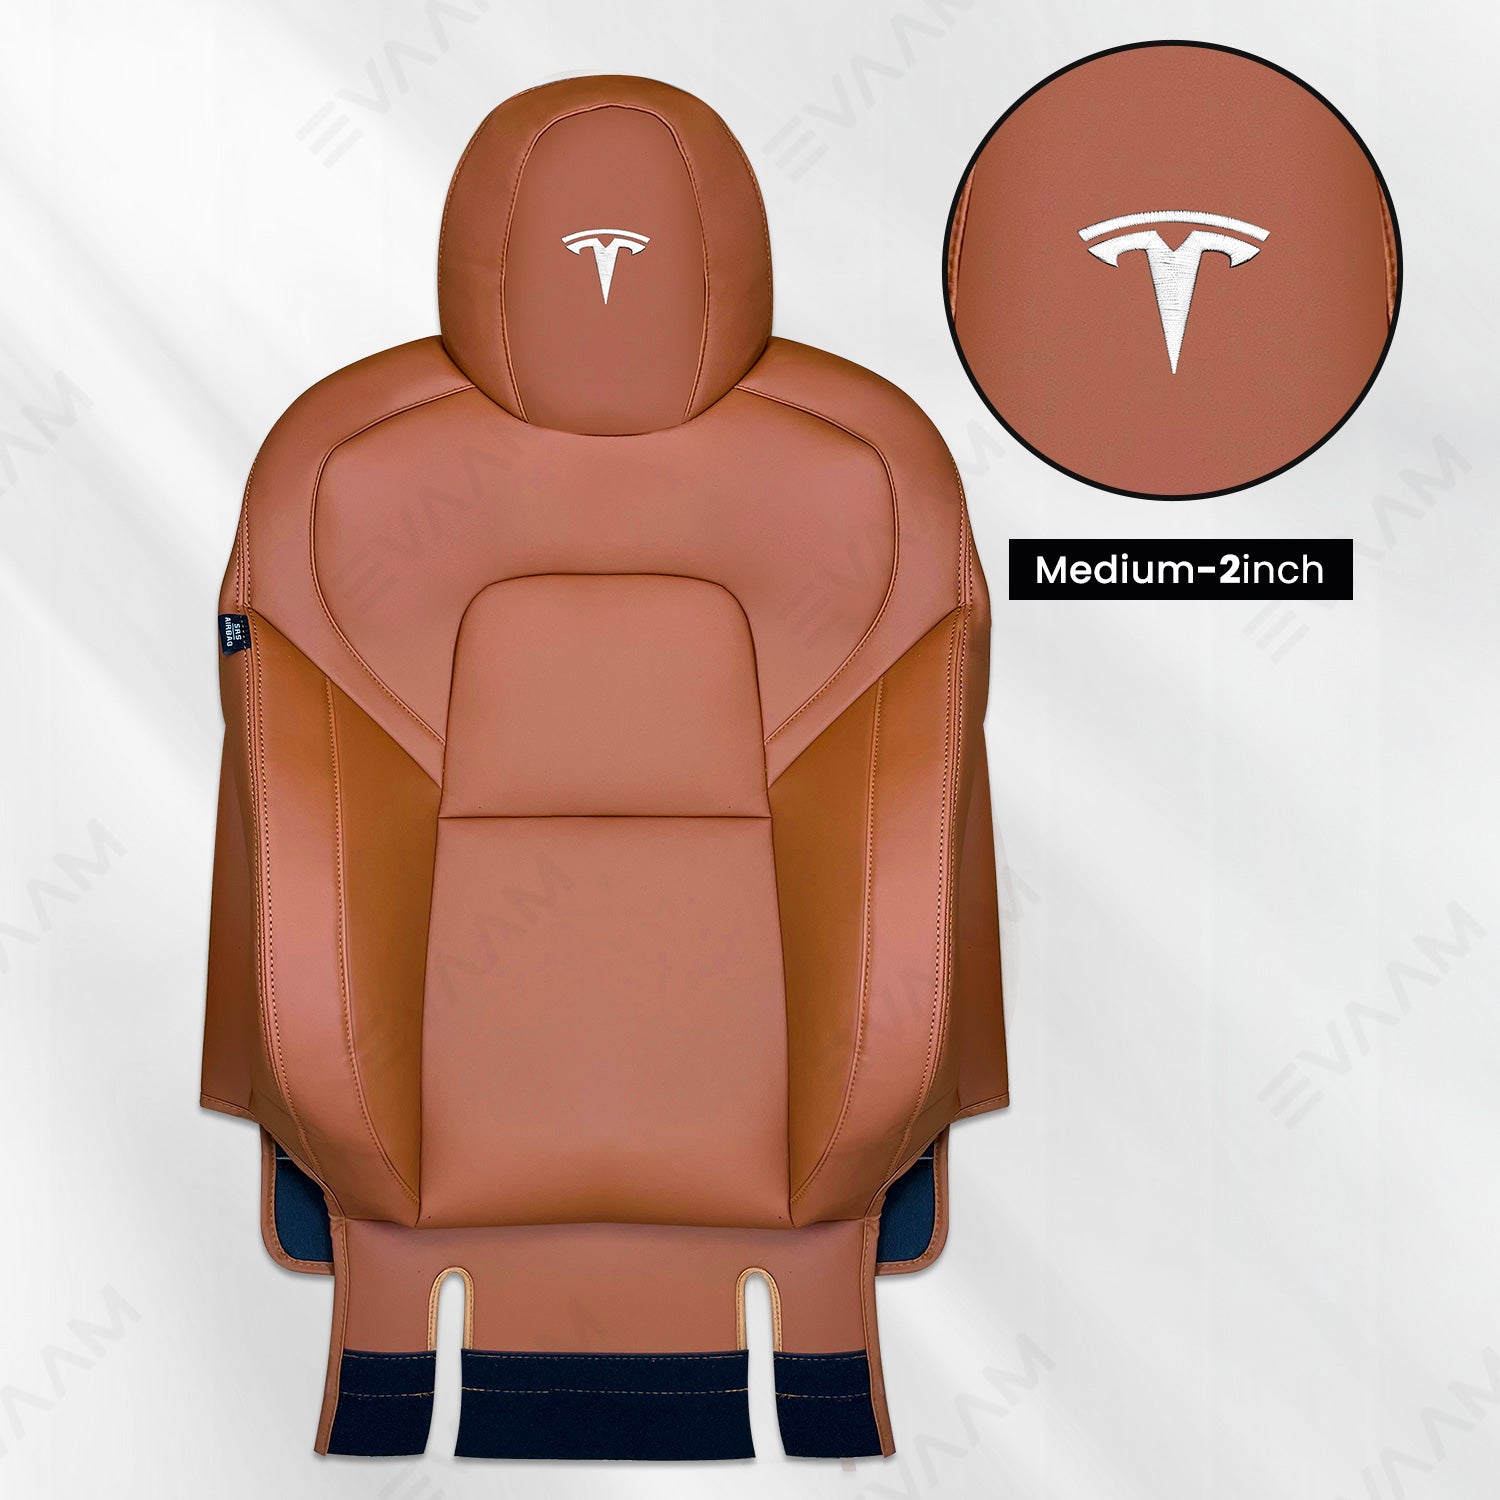 EVAAM® Embroidery Customized logo for Leather Full Seat Covers - EVAAM